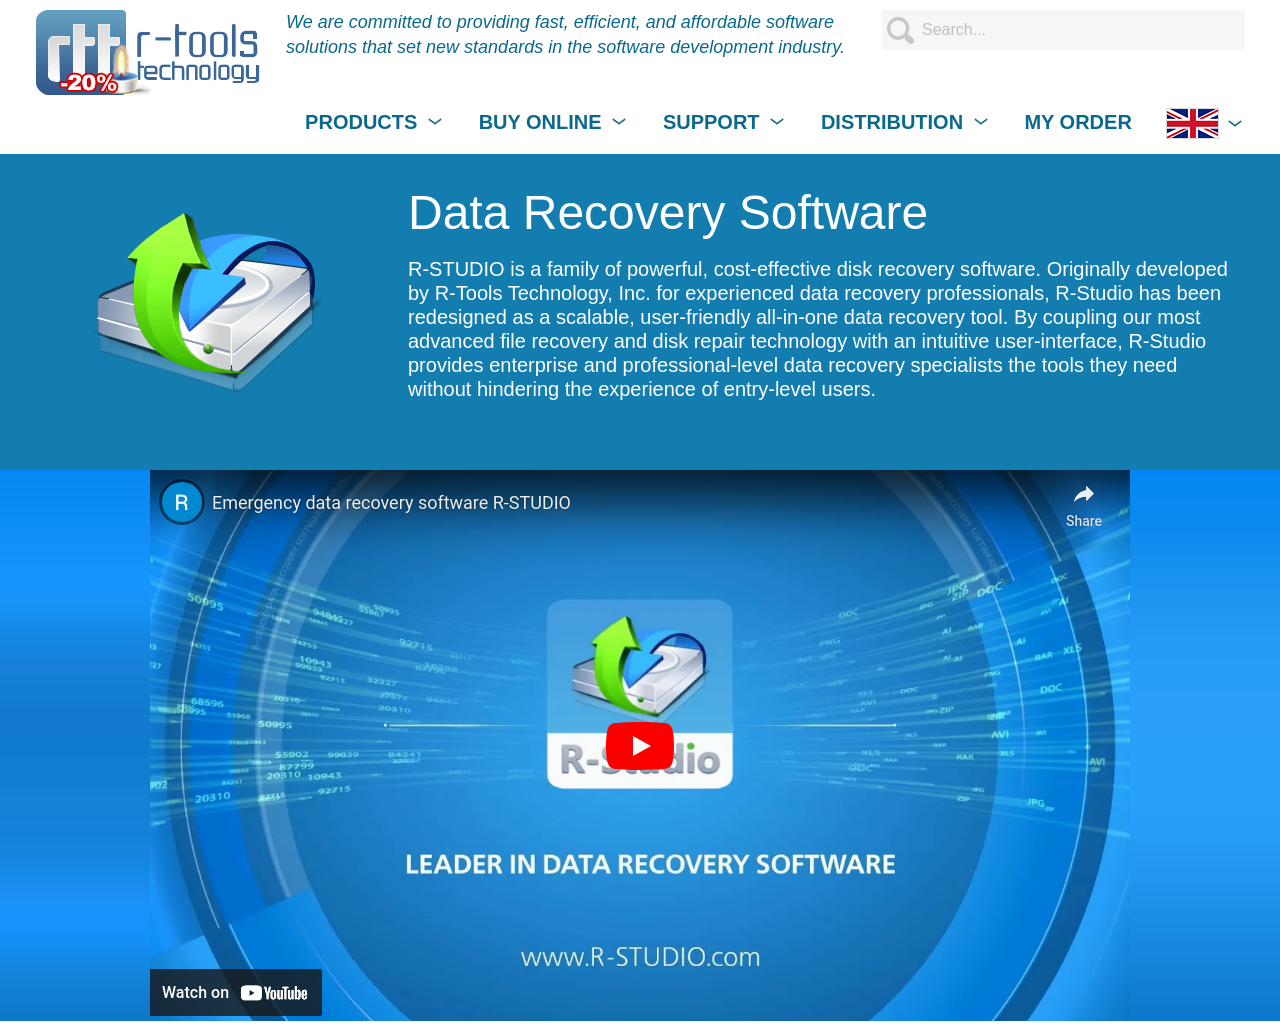 data-recovery-software.net